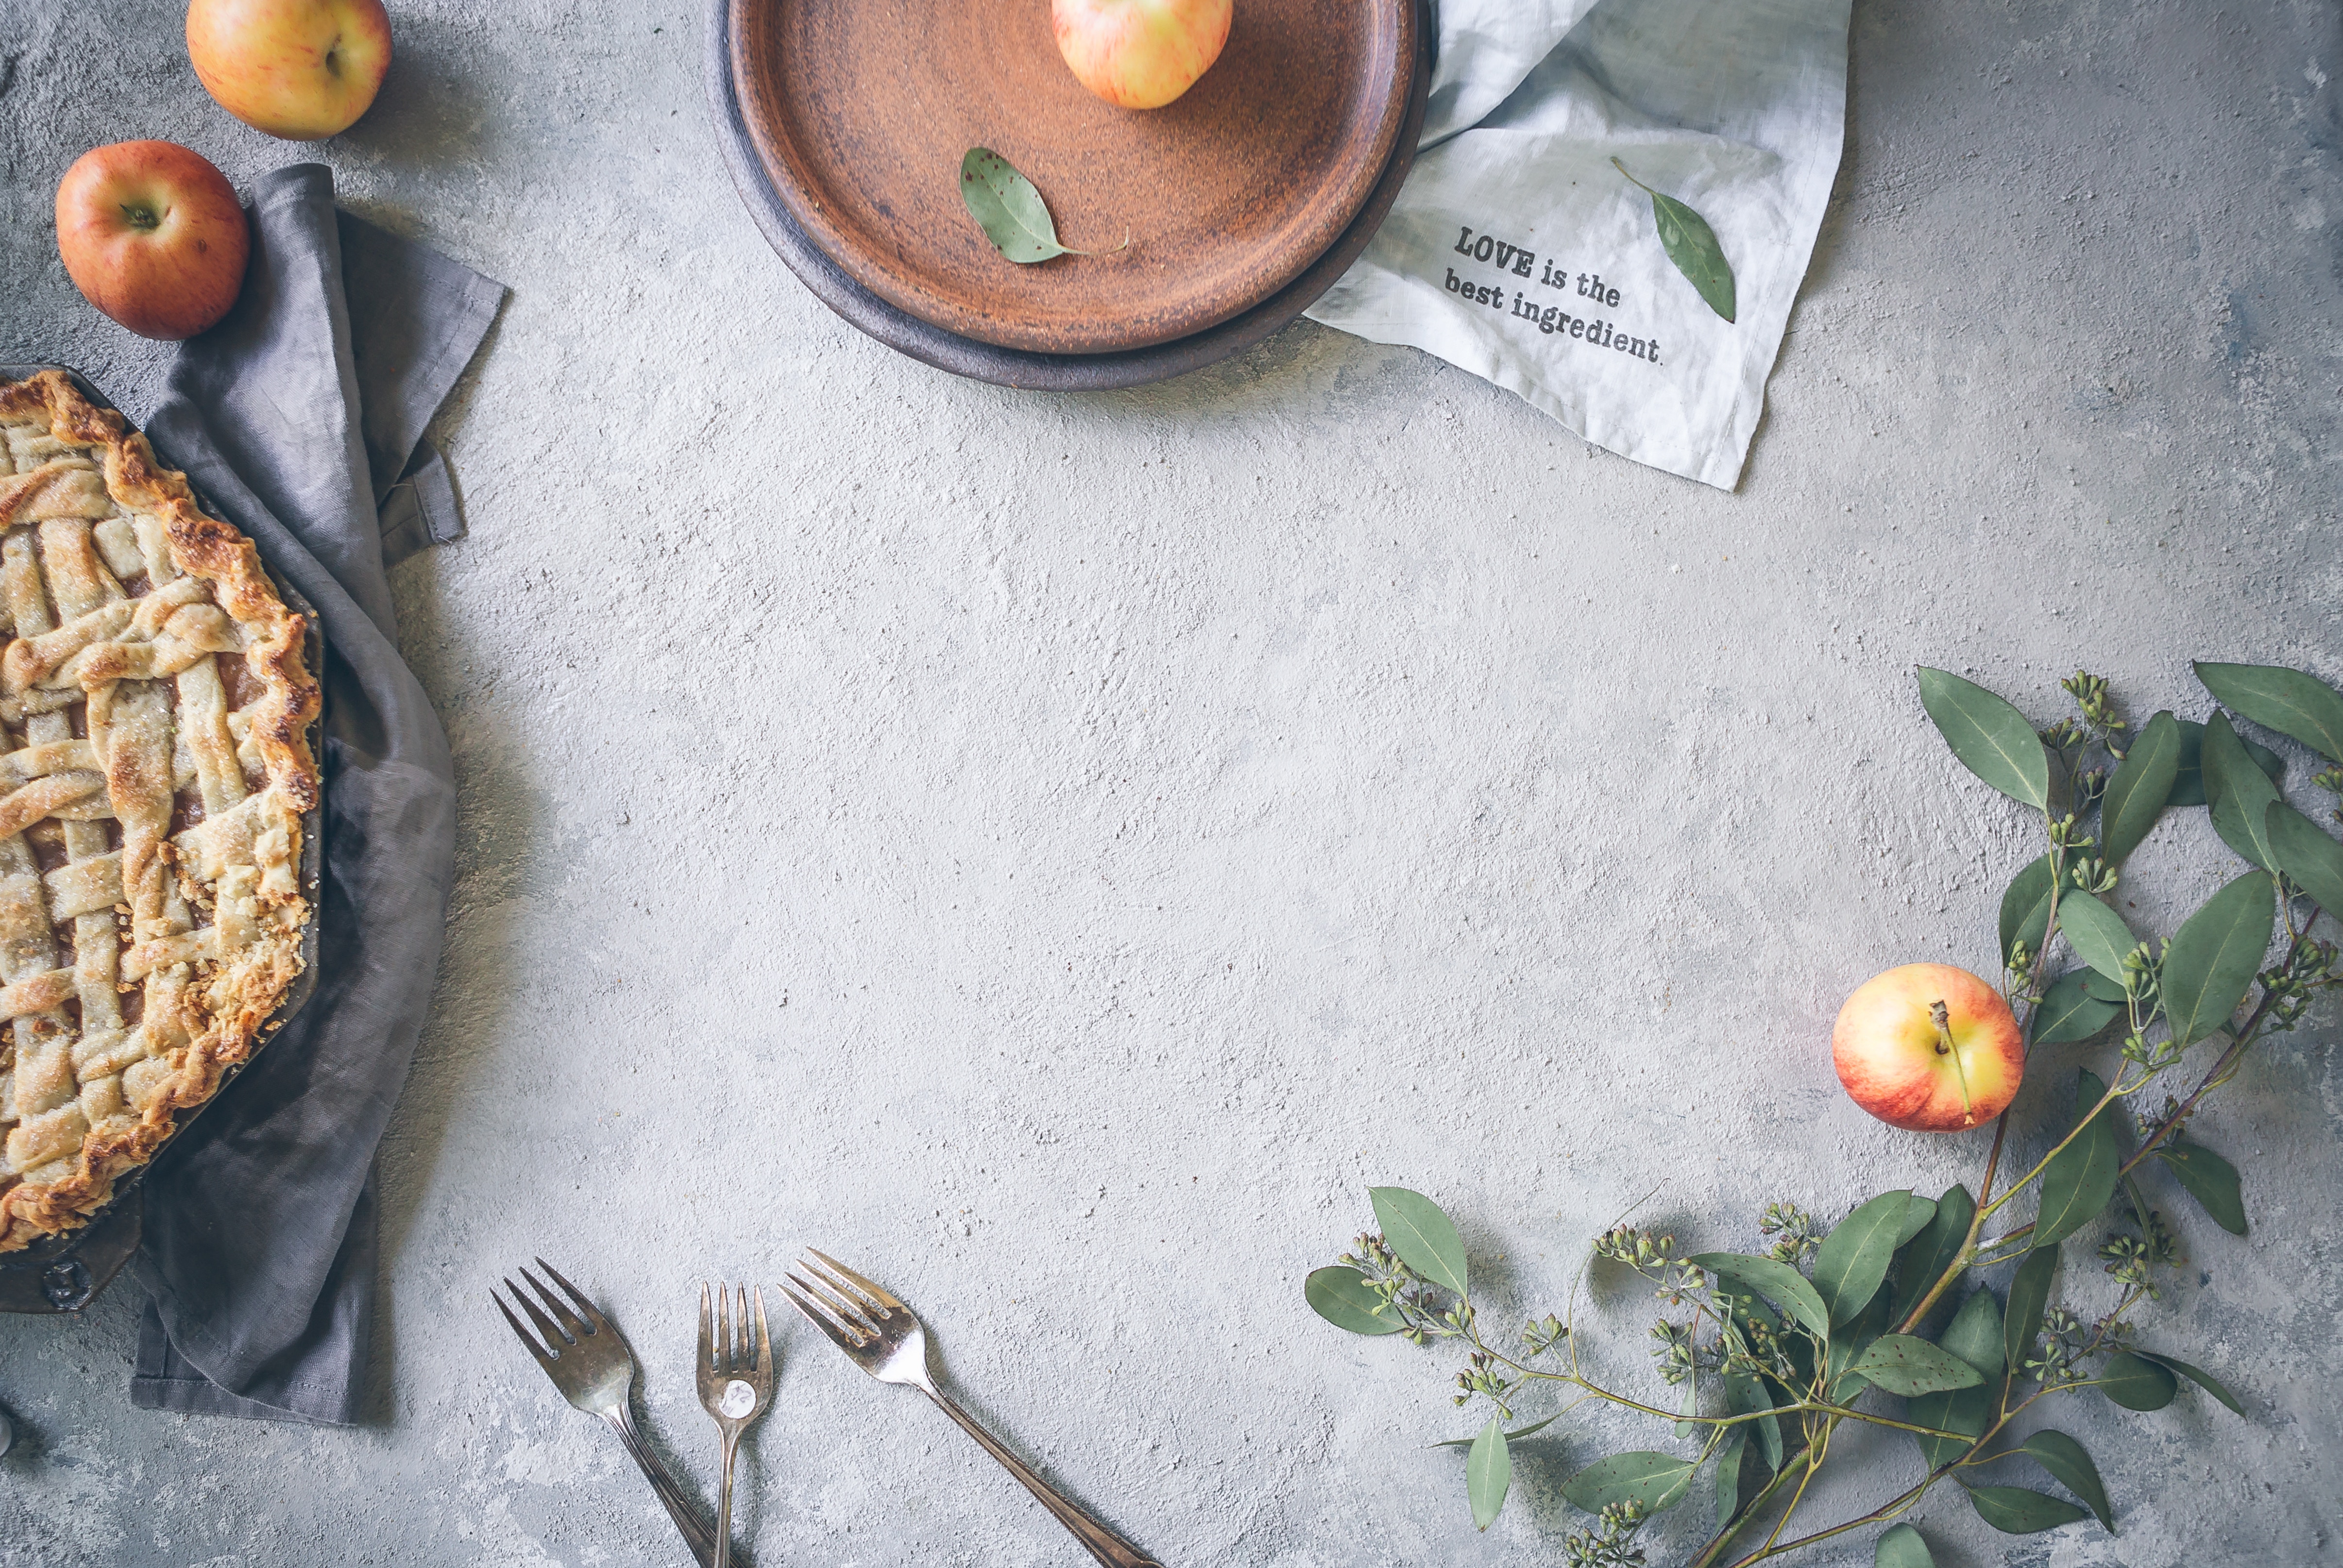 Pie, silverware, wooden bowls, and greenery sitting on grey, cement tabletop